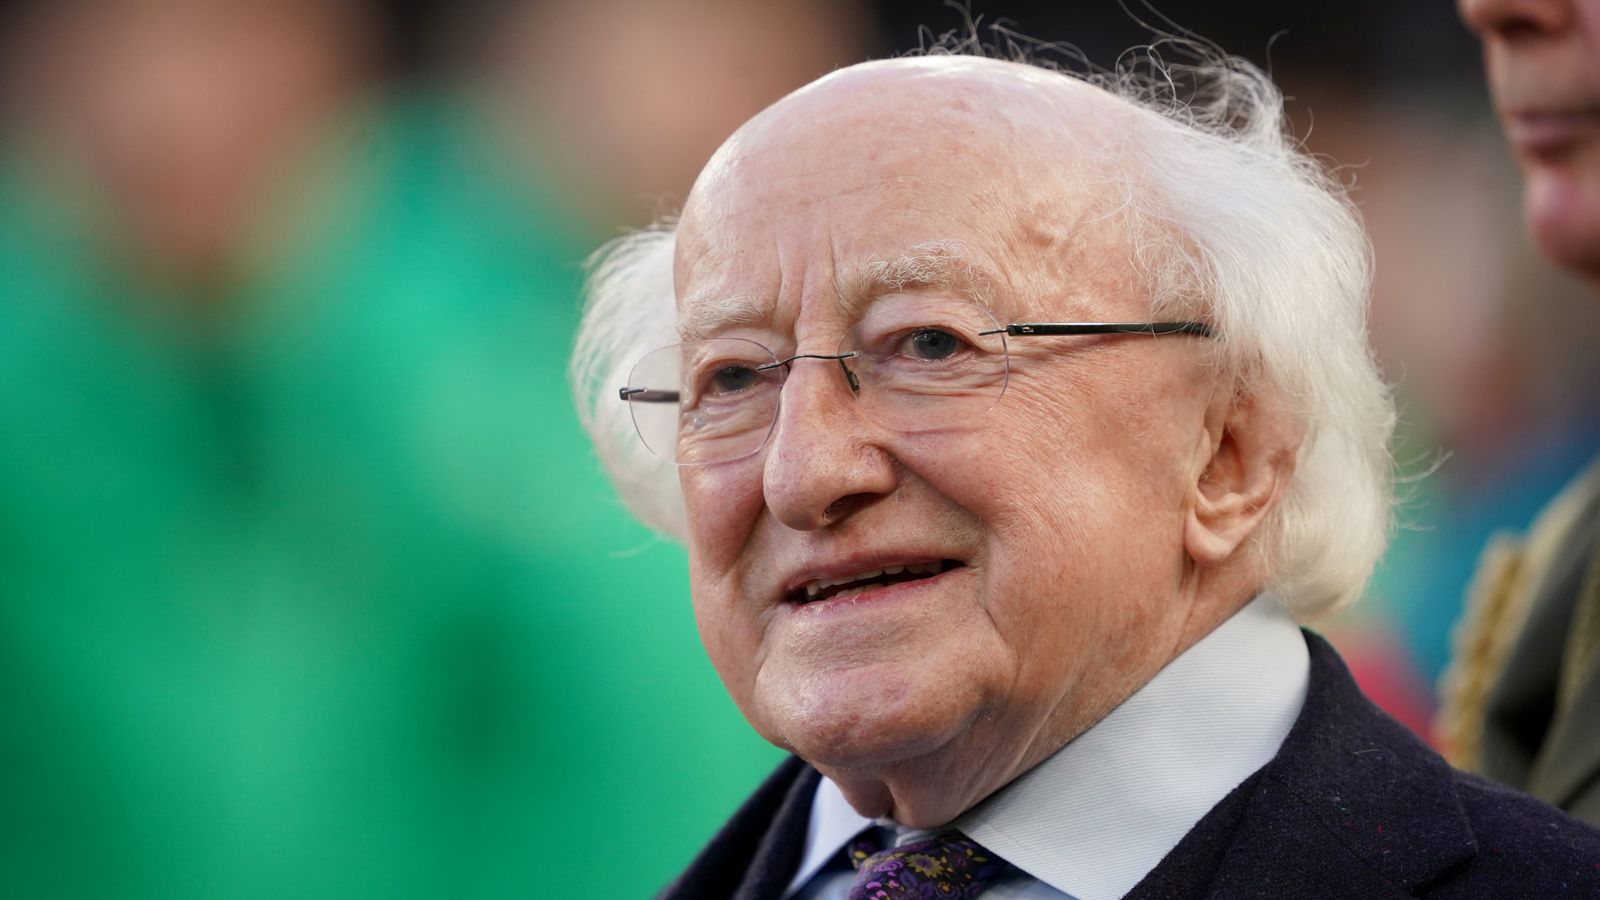 Irish President Michael D Higgins is to remain in hospital over the weekend